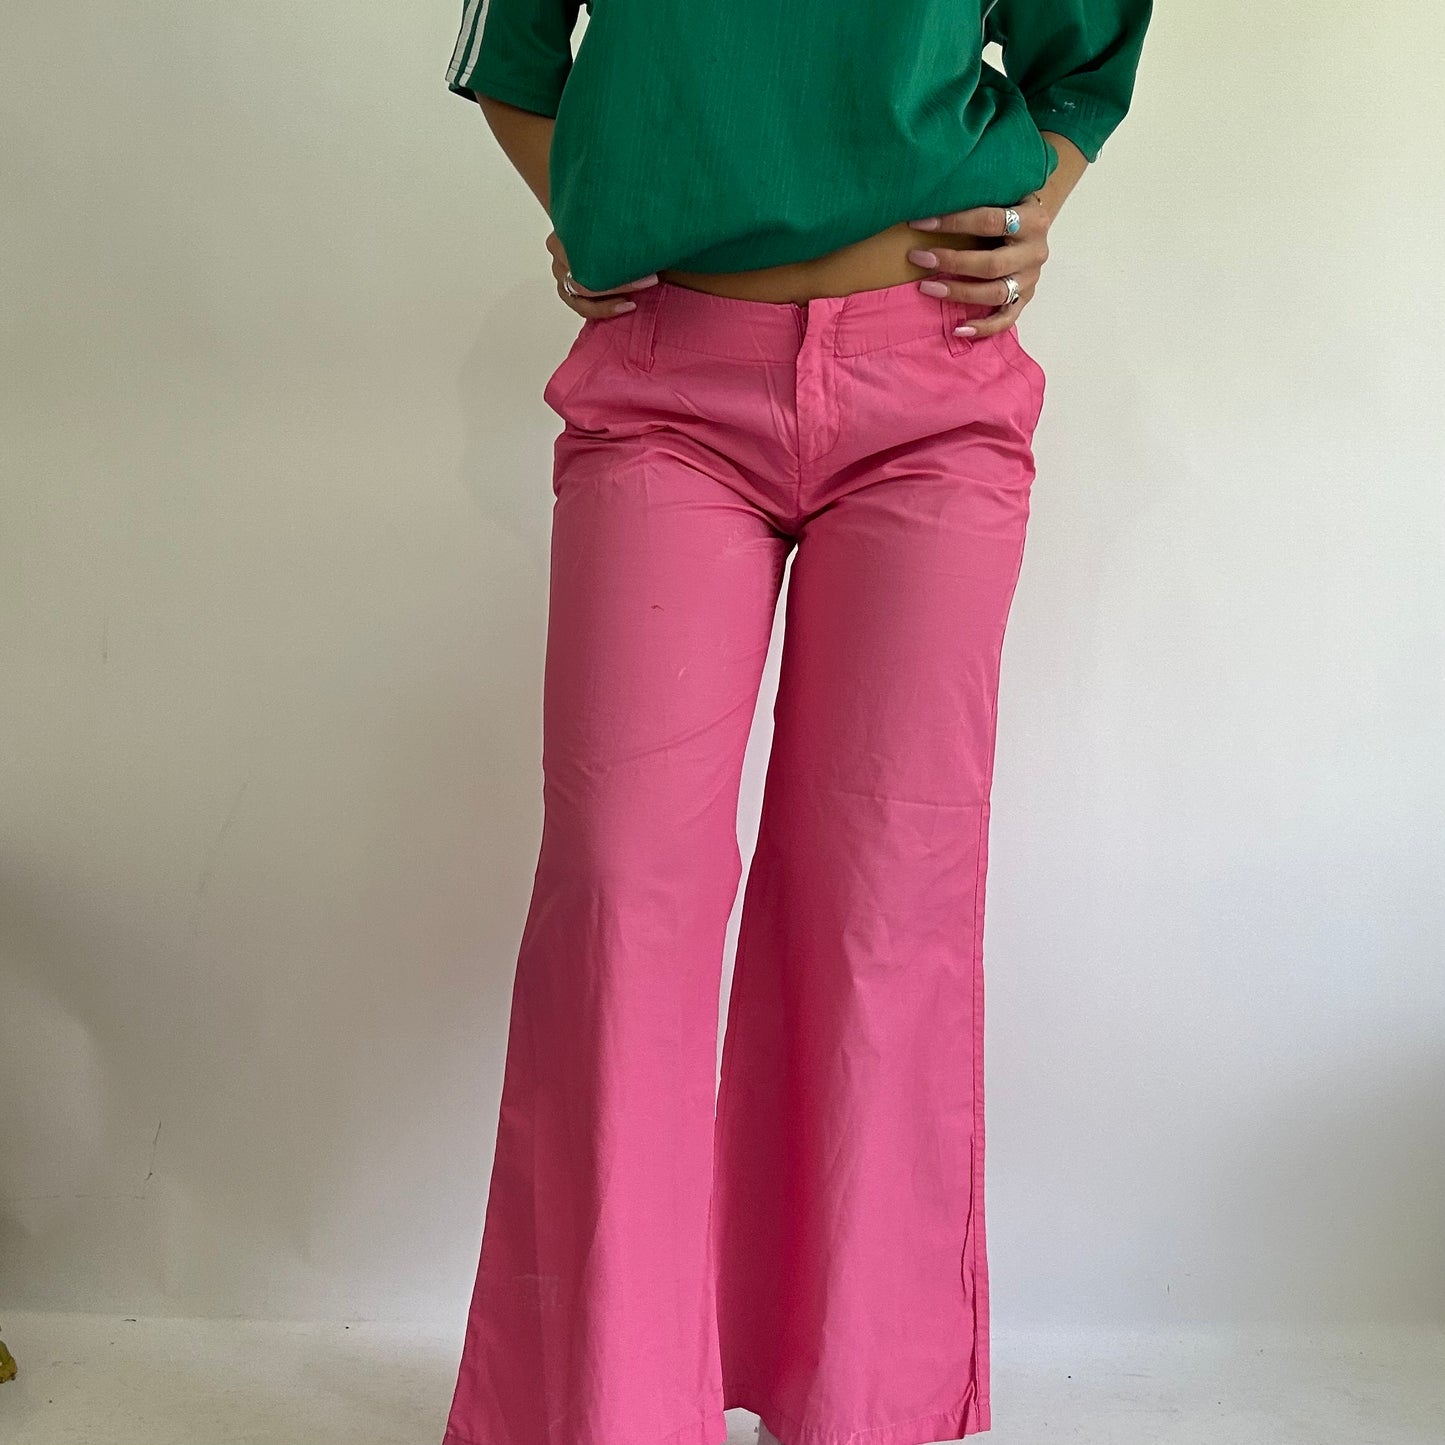 EUROPEAN SUMMER DROP | small pink shell material trousers